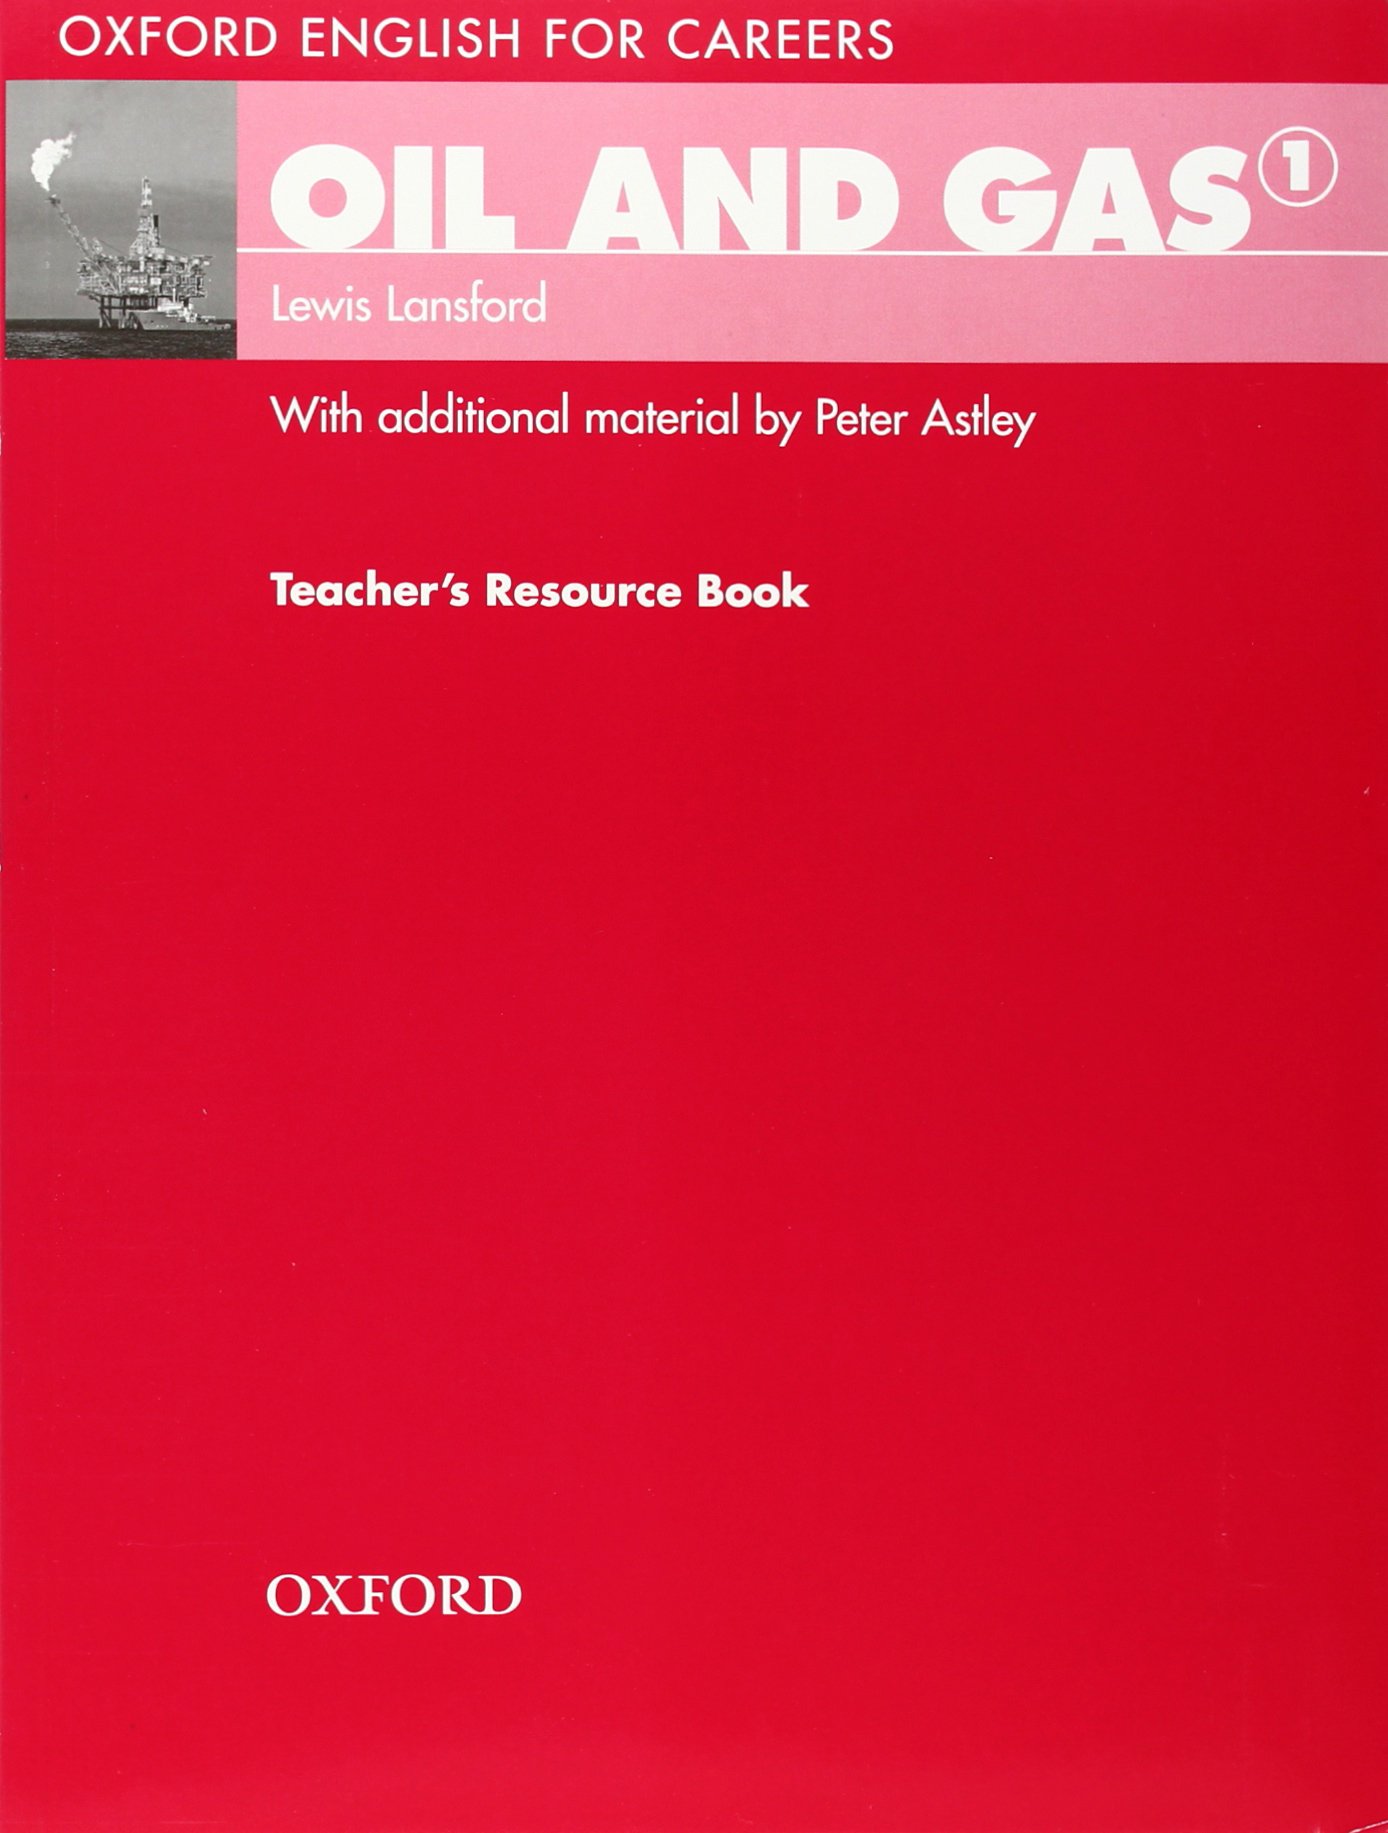 OIL AND GAS (OXFORD ENGLISH FOR CAREERS) 1 Teacher's Resource Book